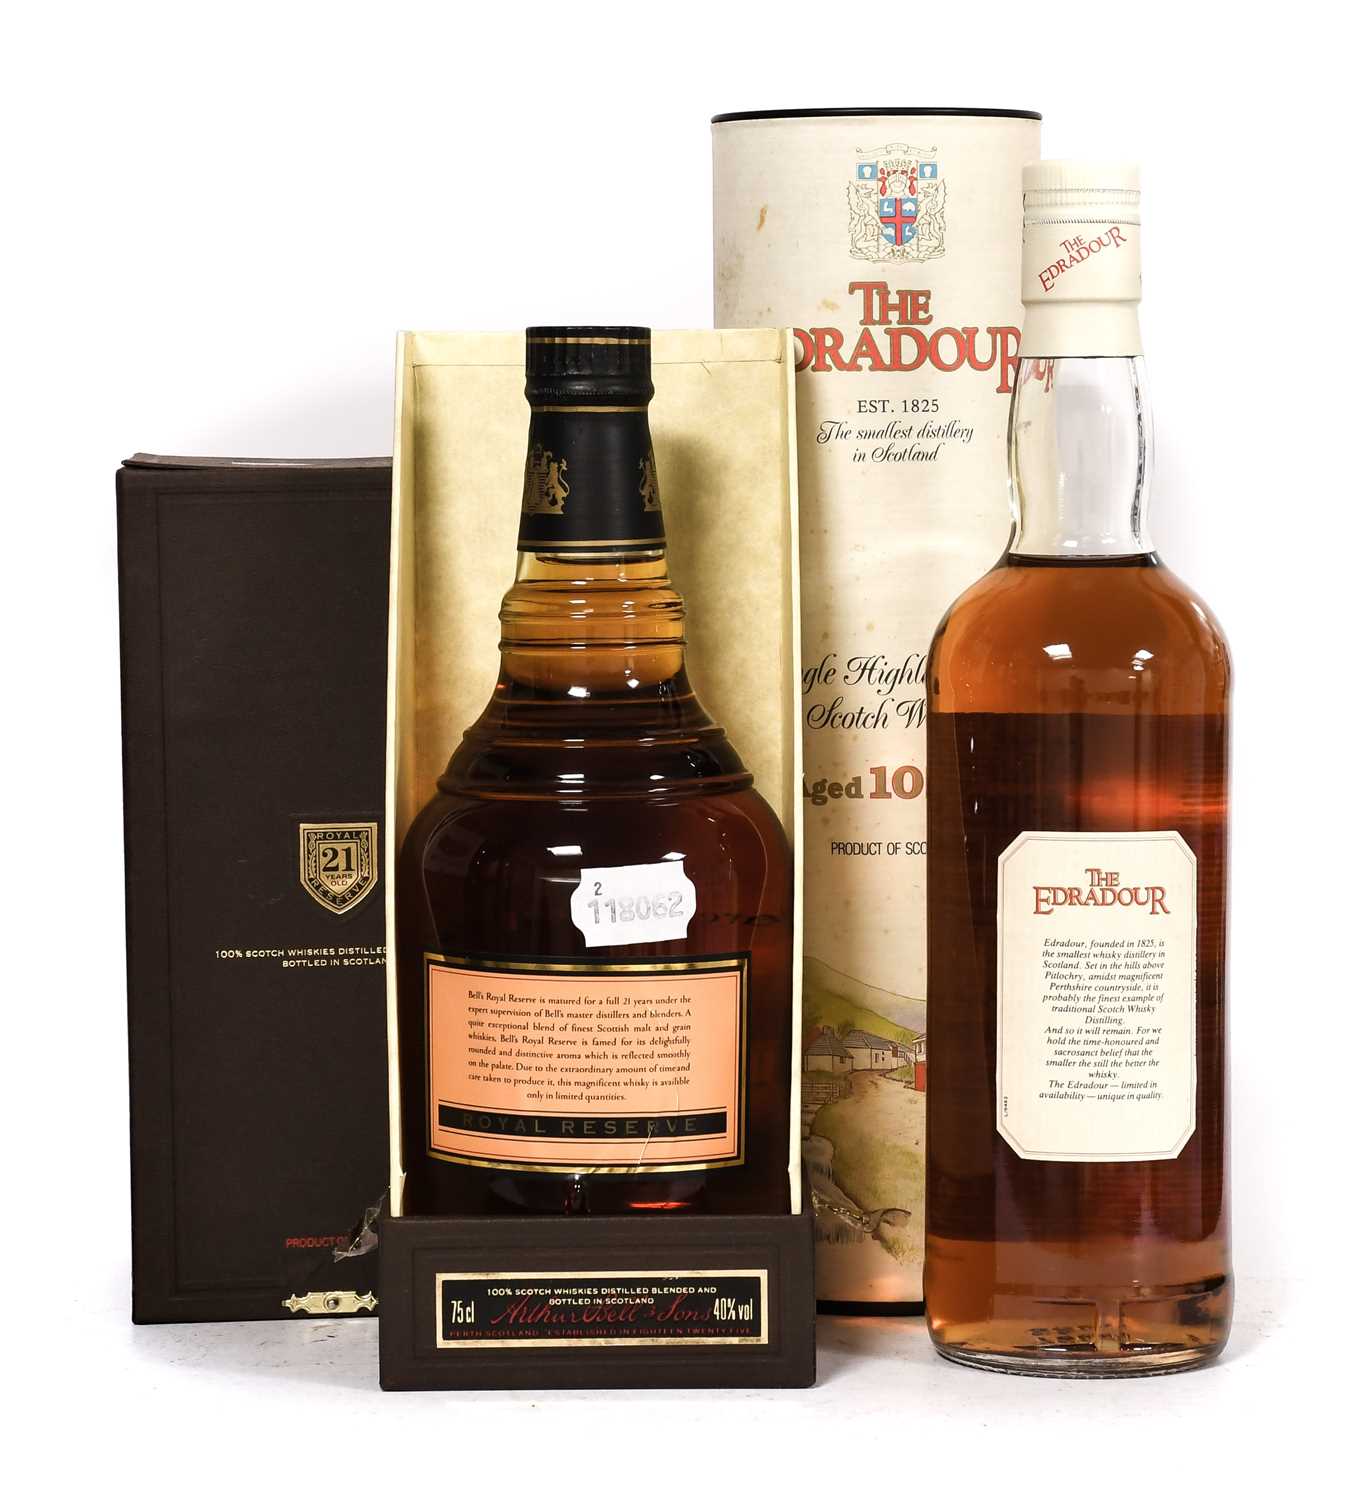 Bells 21 Year Old Very Rare Scotch Whisky, 40% vol 75cl (one bottle), The Edradour Single Highland - Image 2 of 2